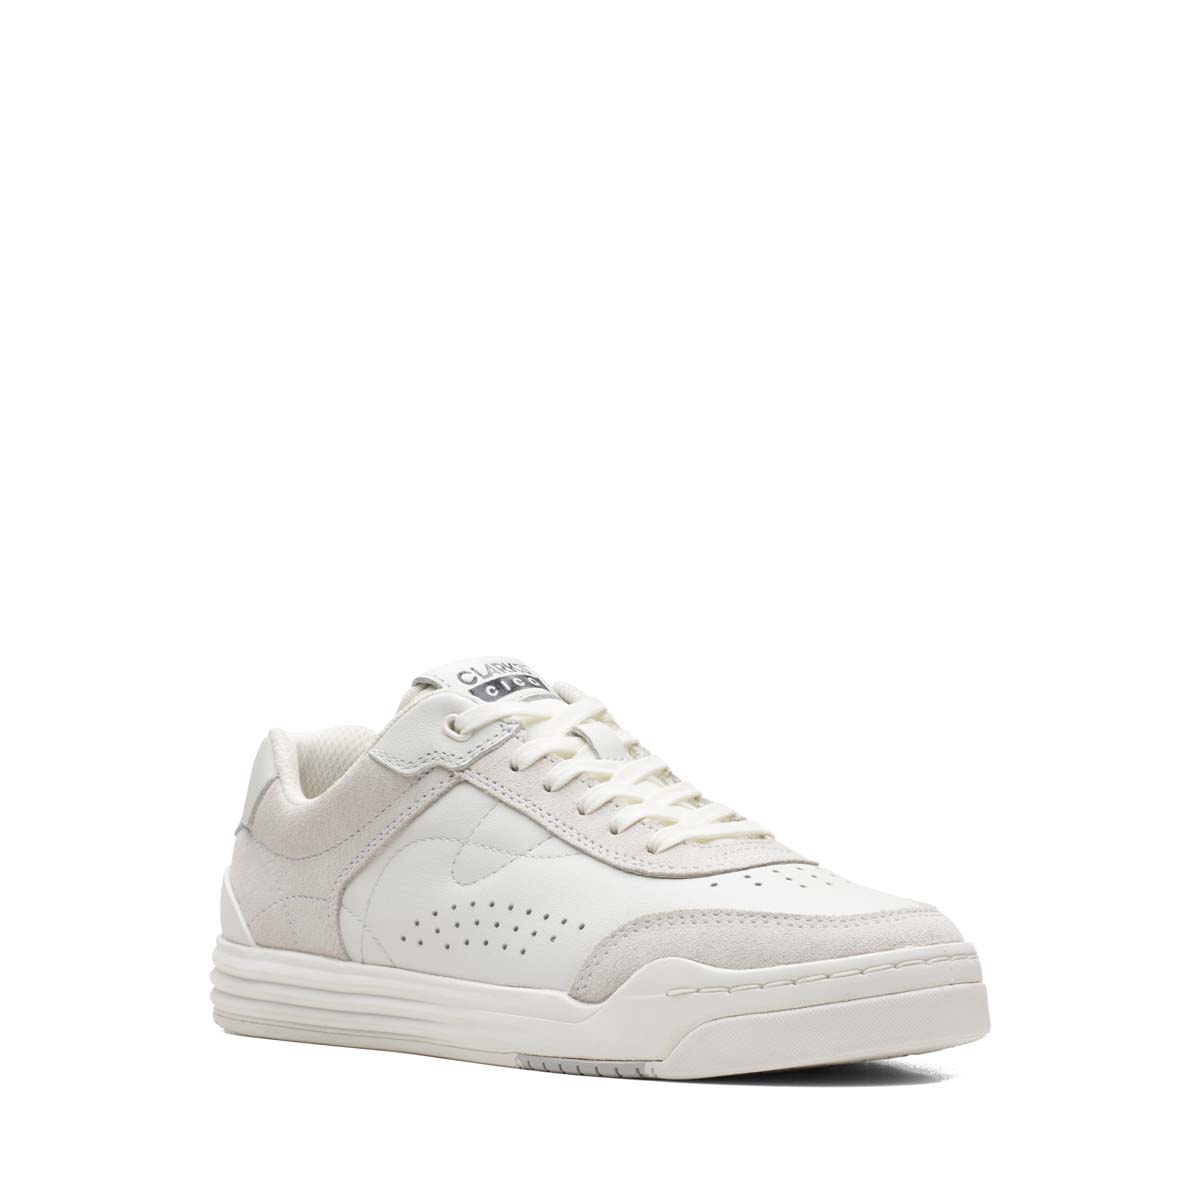 Clarks Cica 2.0 O White Leather Kids Boys Trainers 726347G In Size 5.5 In Plain White Leather G Width Fitting For kids